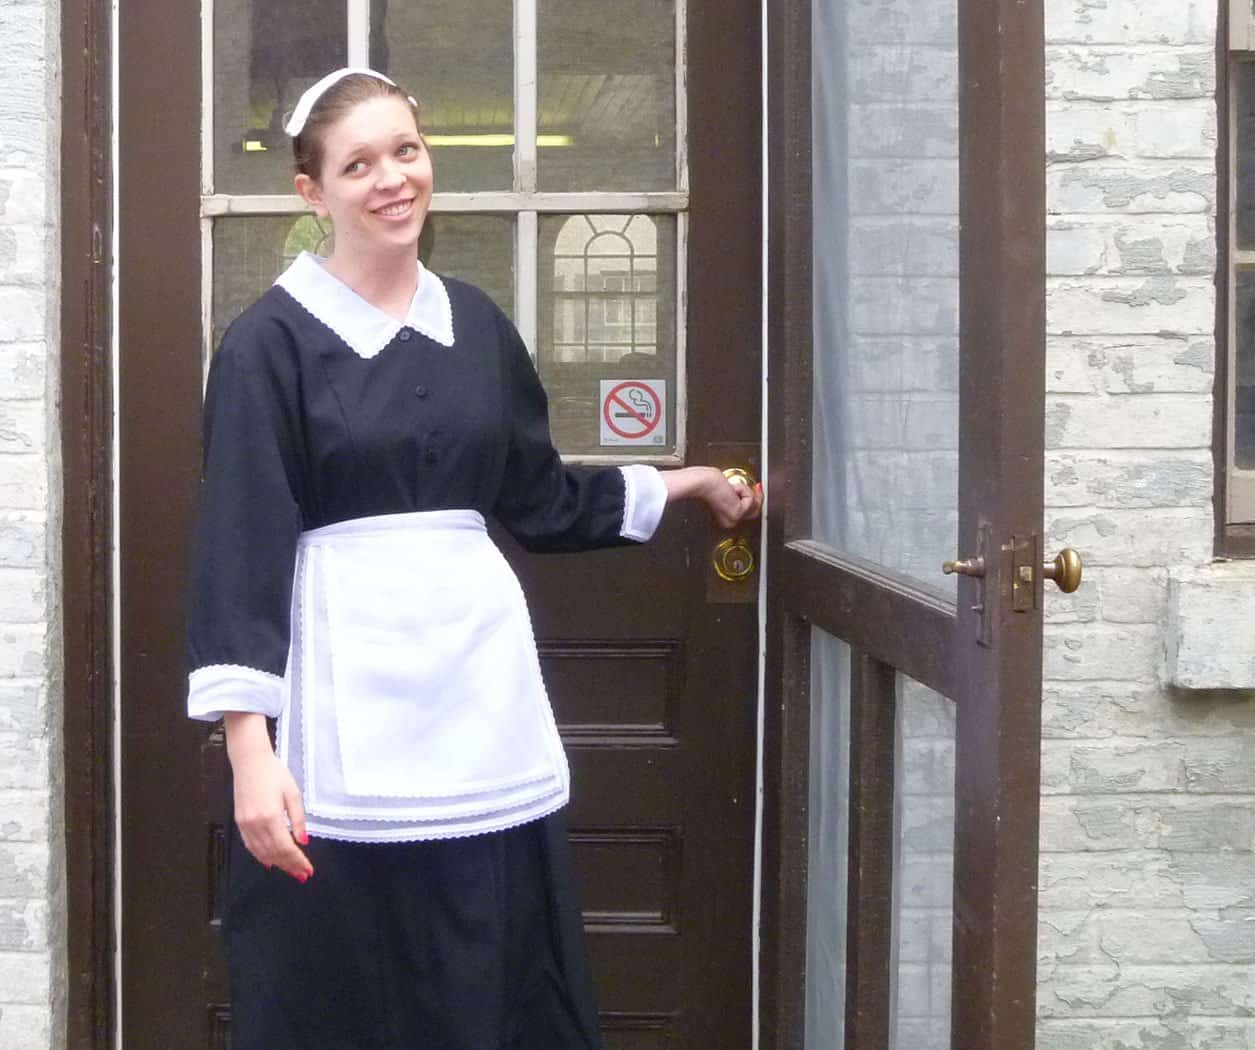 Jessie the maid quickly showed the new gardeners to the back door!